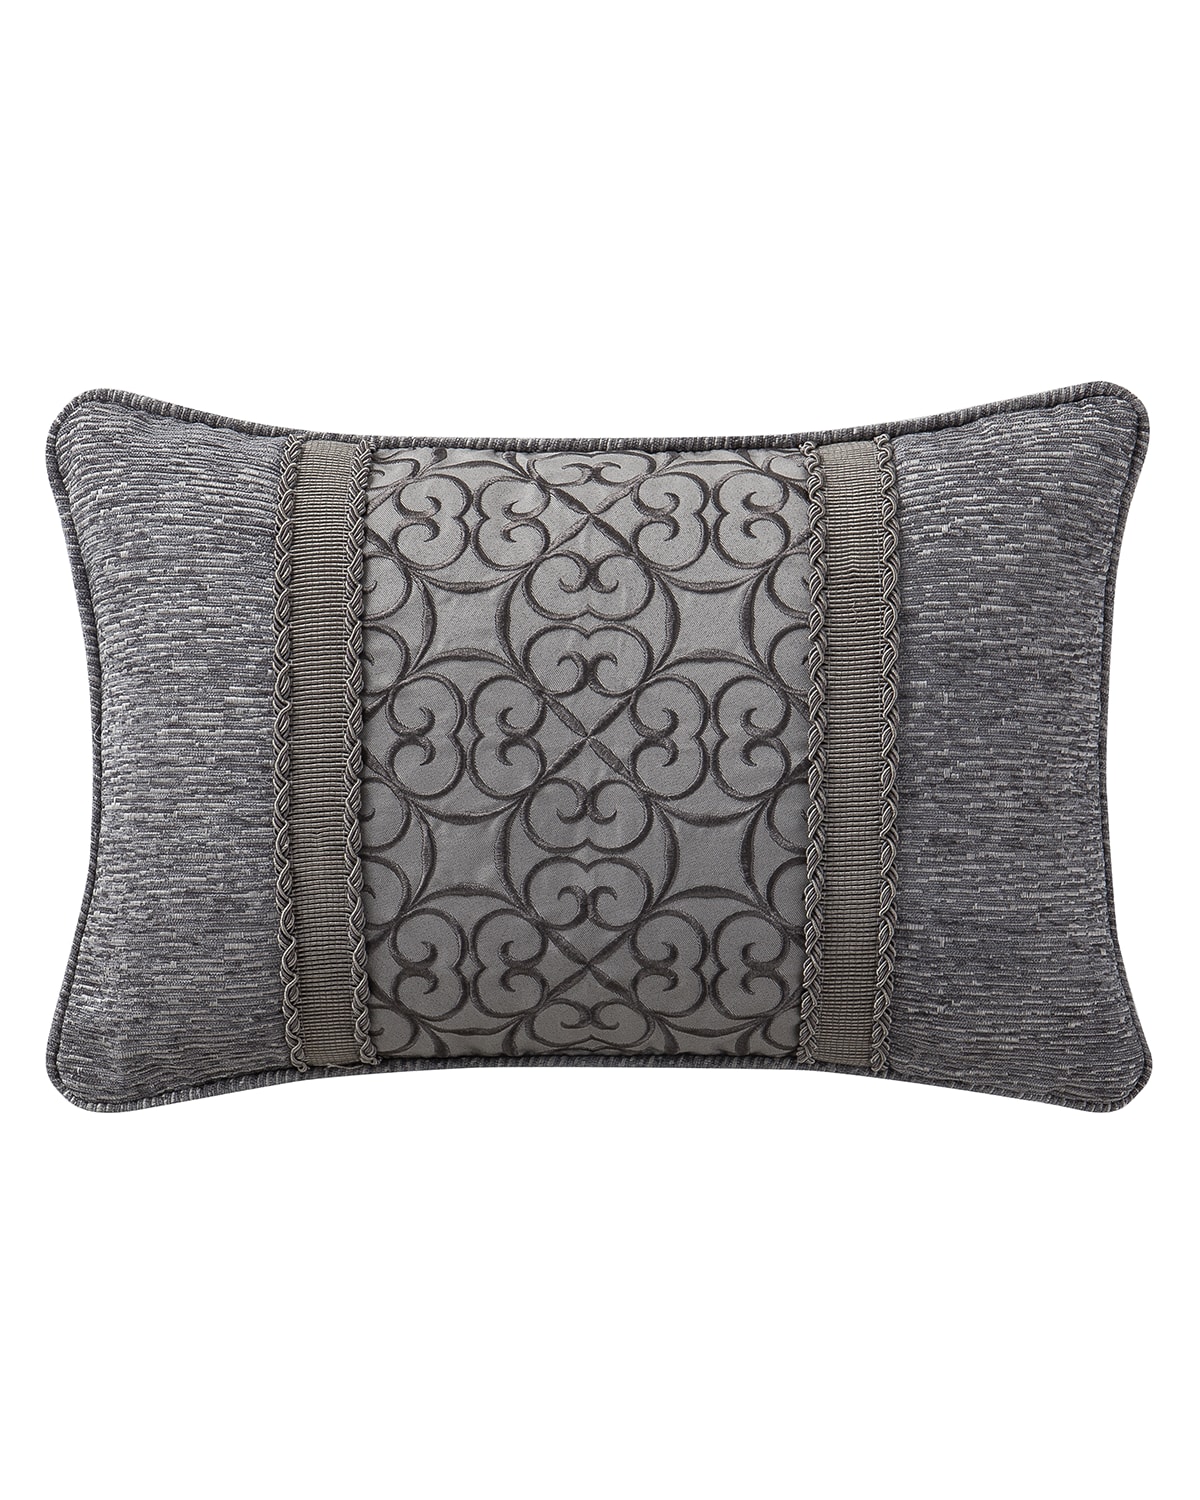 Image Waterford Carrick 12x18 Decorative Pillow